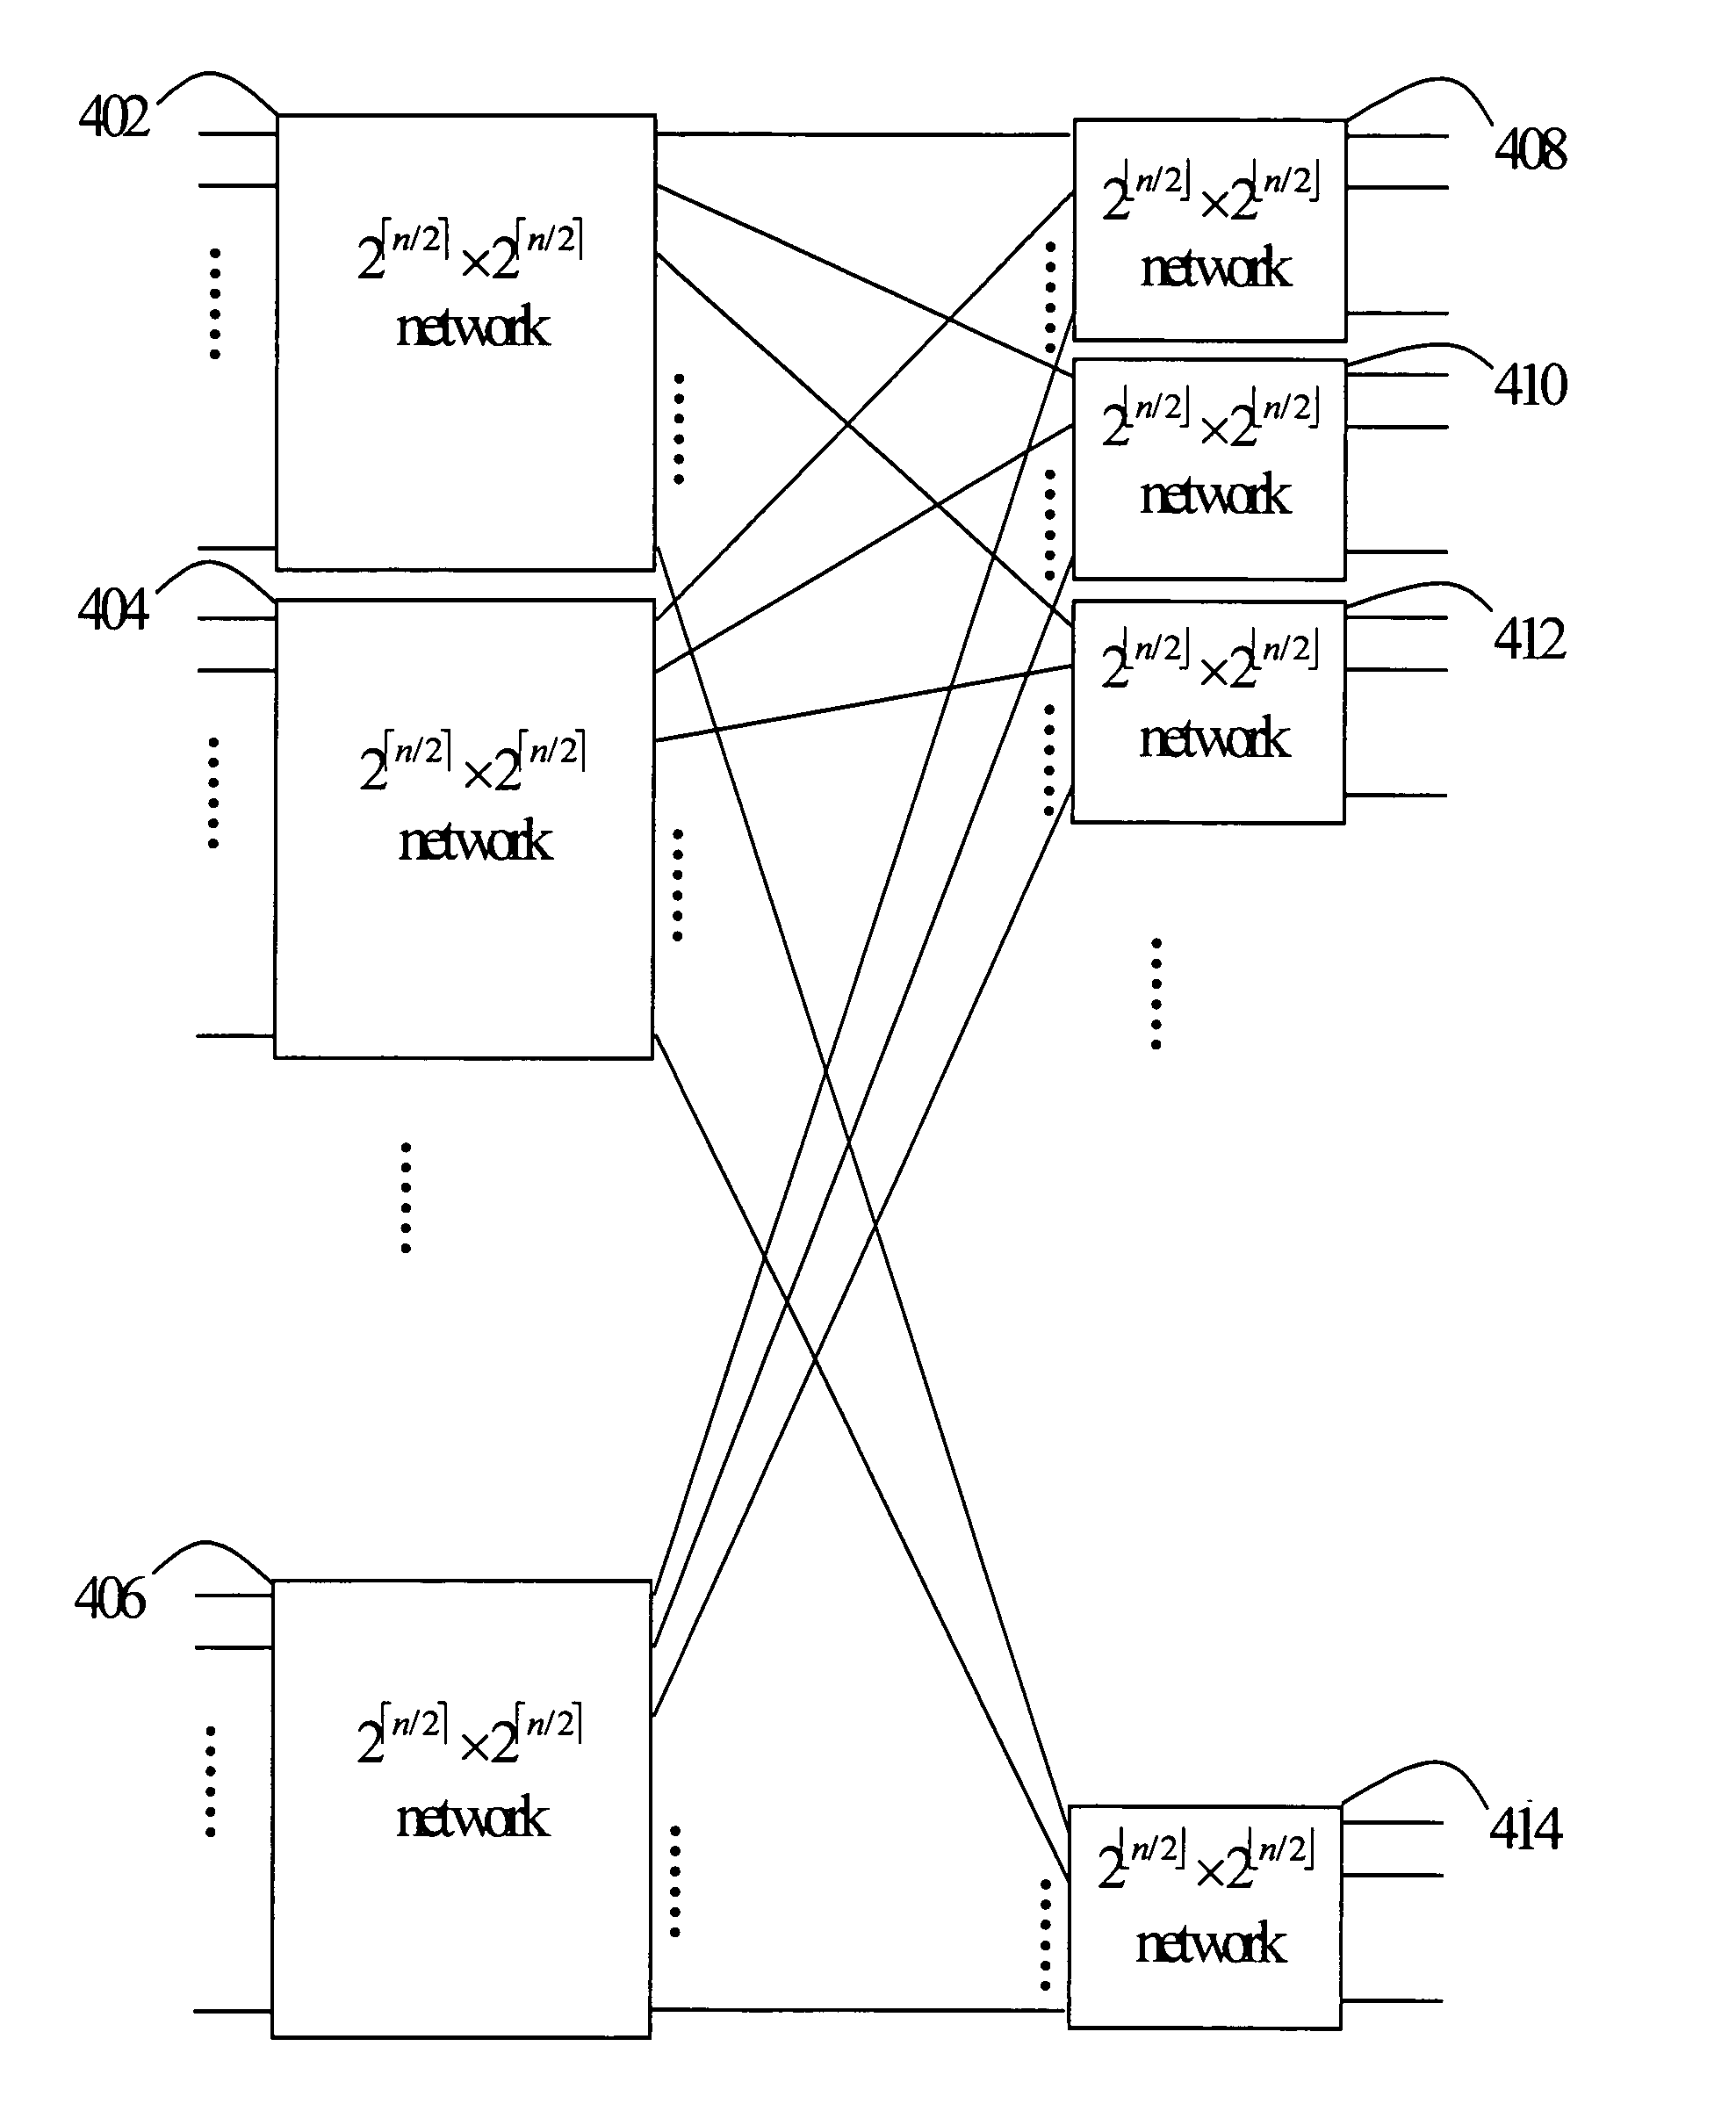 Switching by multistage interconnection of concentrators